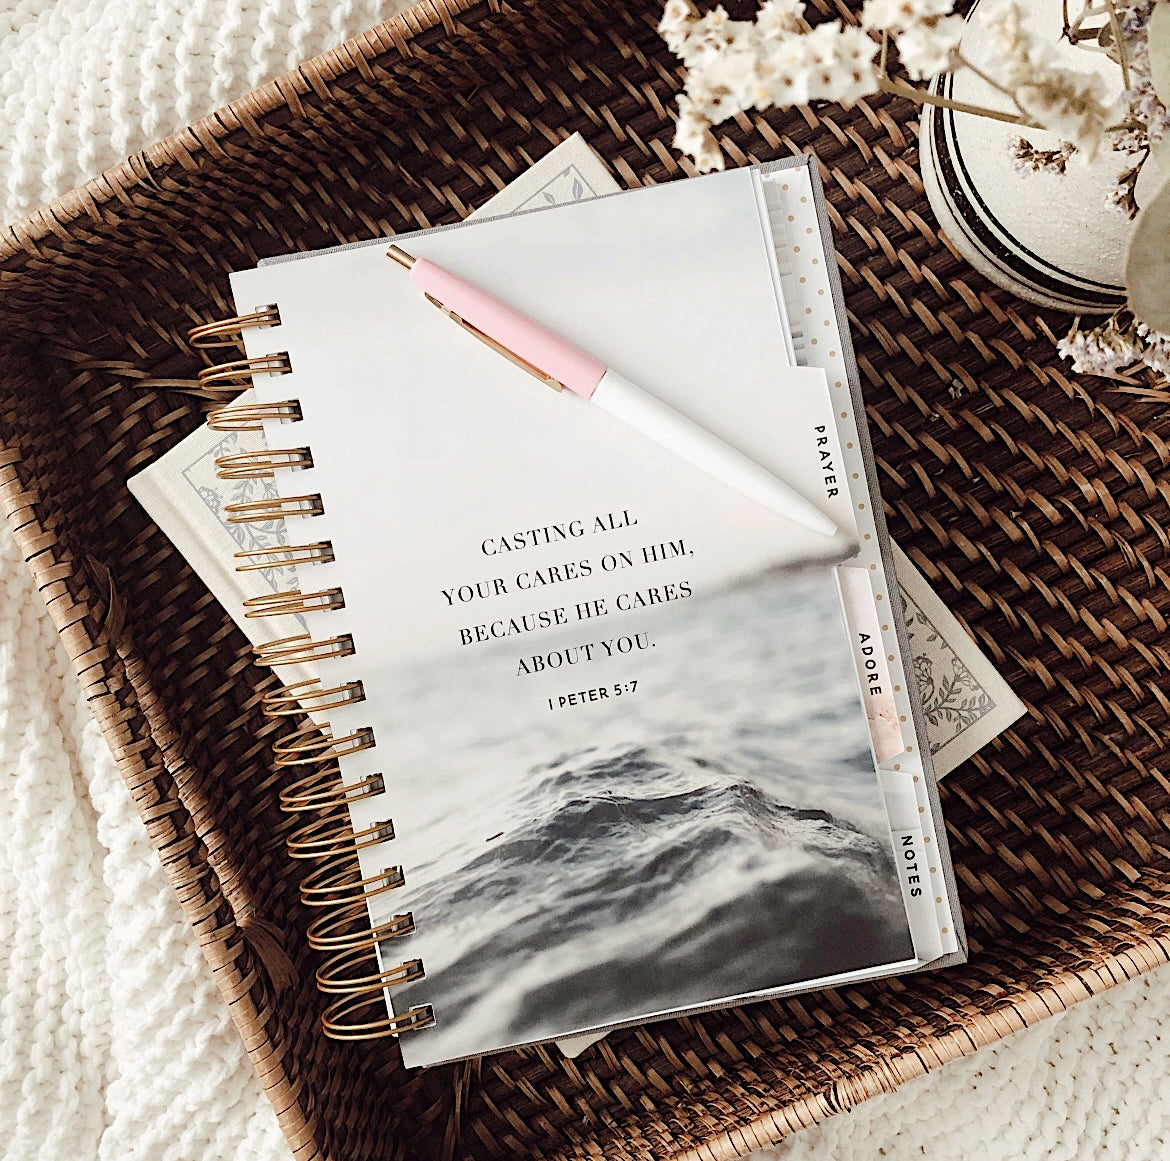 The Abide Journal